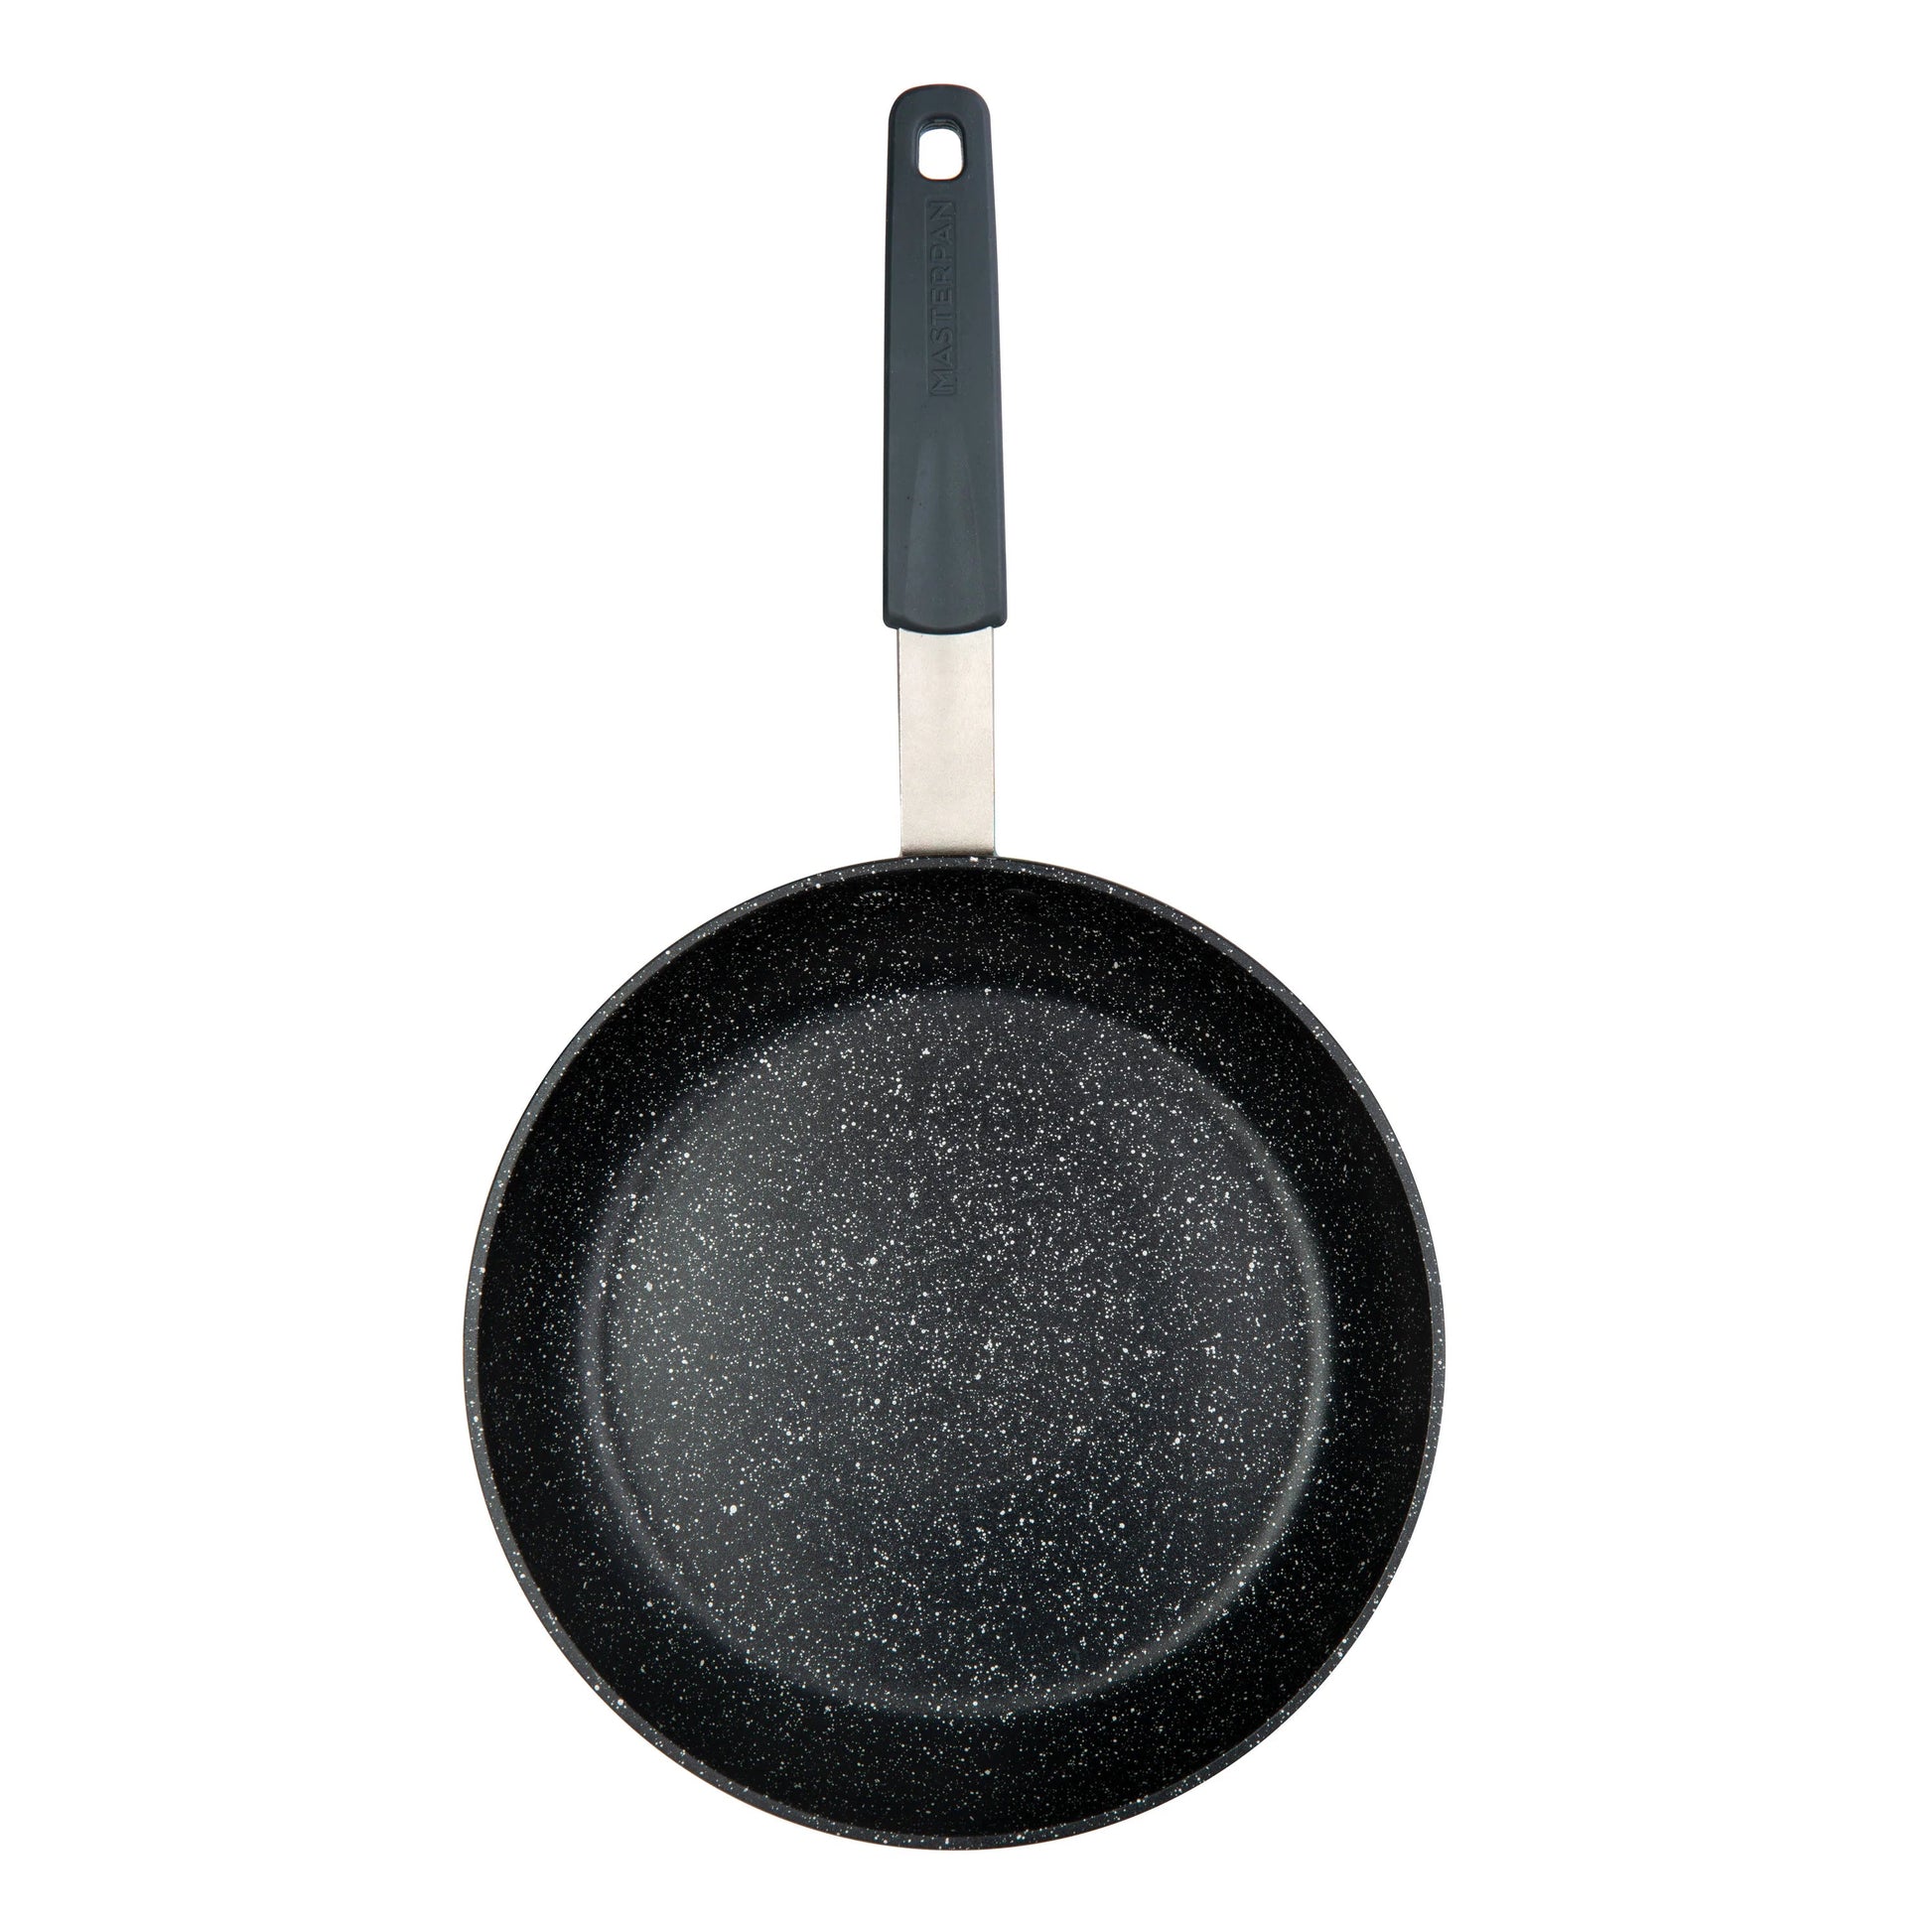 MasterPan 11 in. Non-Stick Aluminium Cookware Fry Pan & Skillet with Stainless Steel Chefs Handle